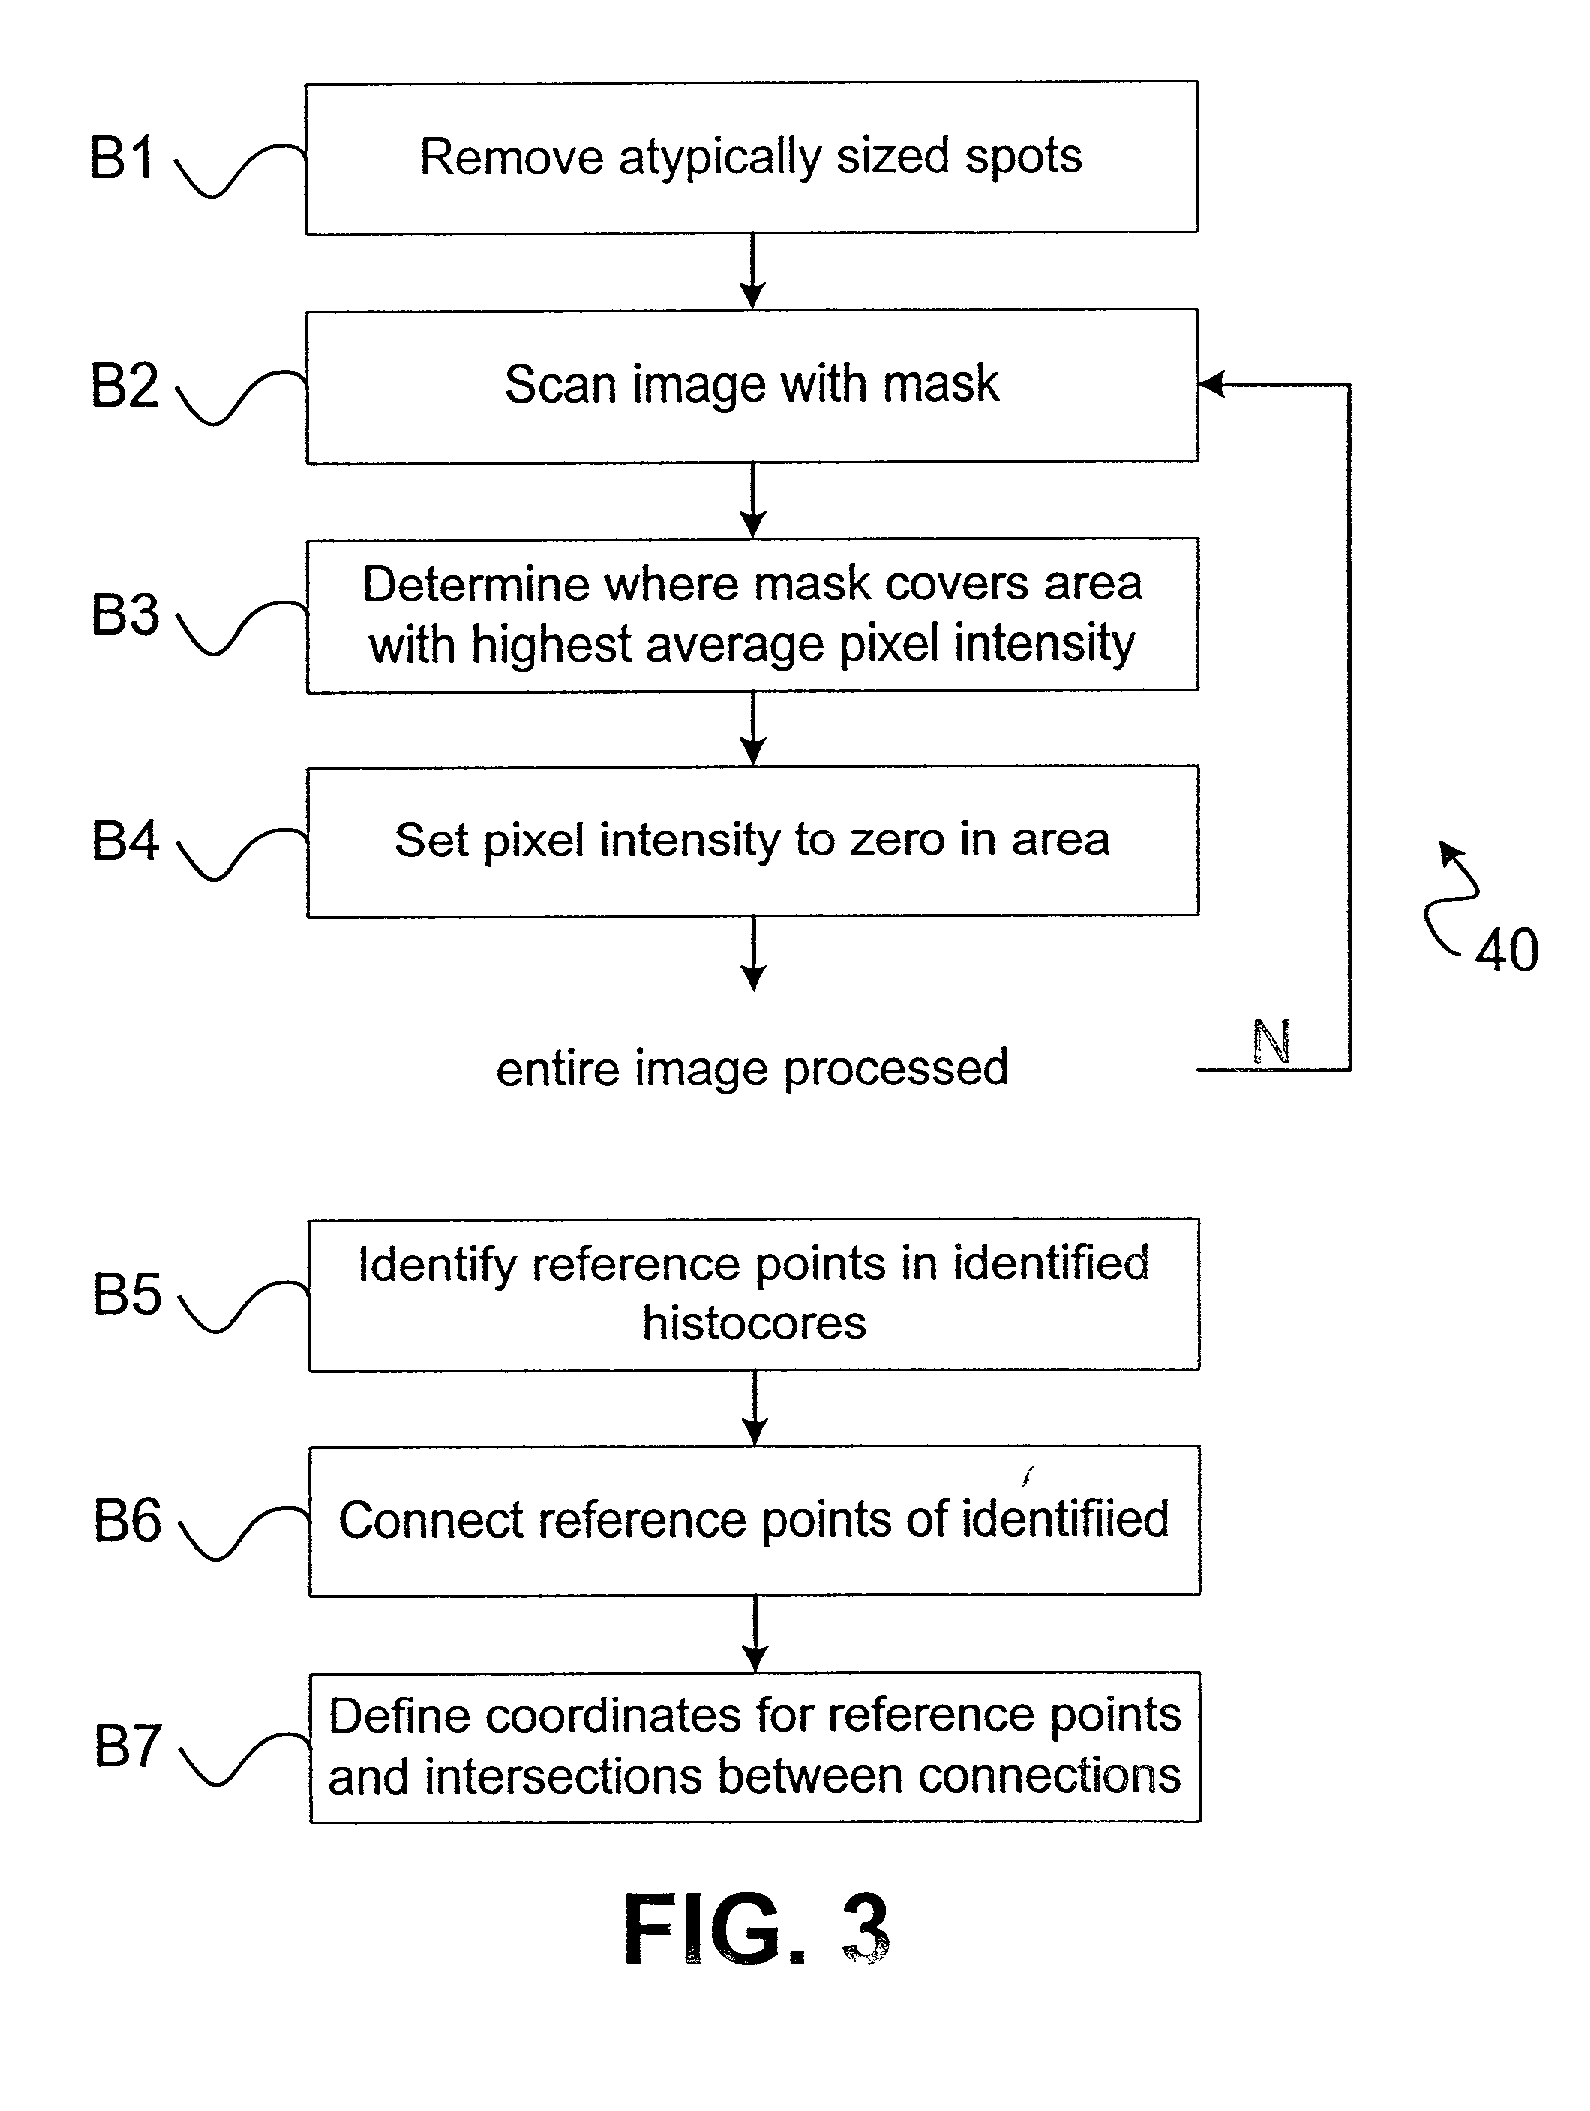 Systems and methods for automated analysis of cells and tissues